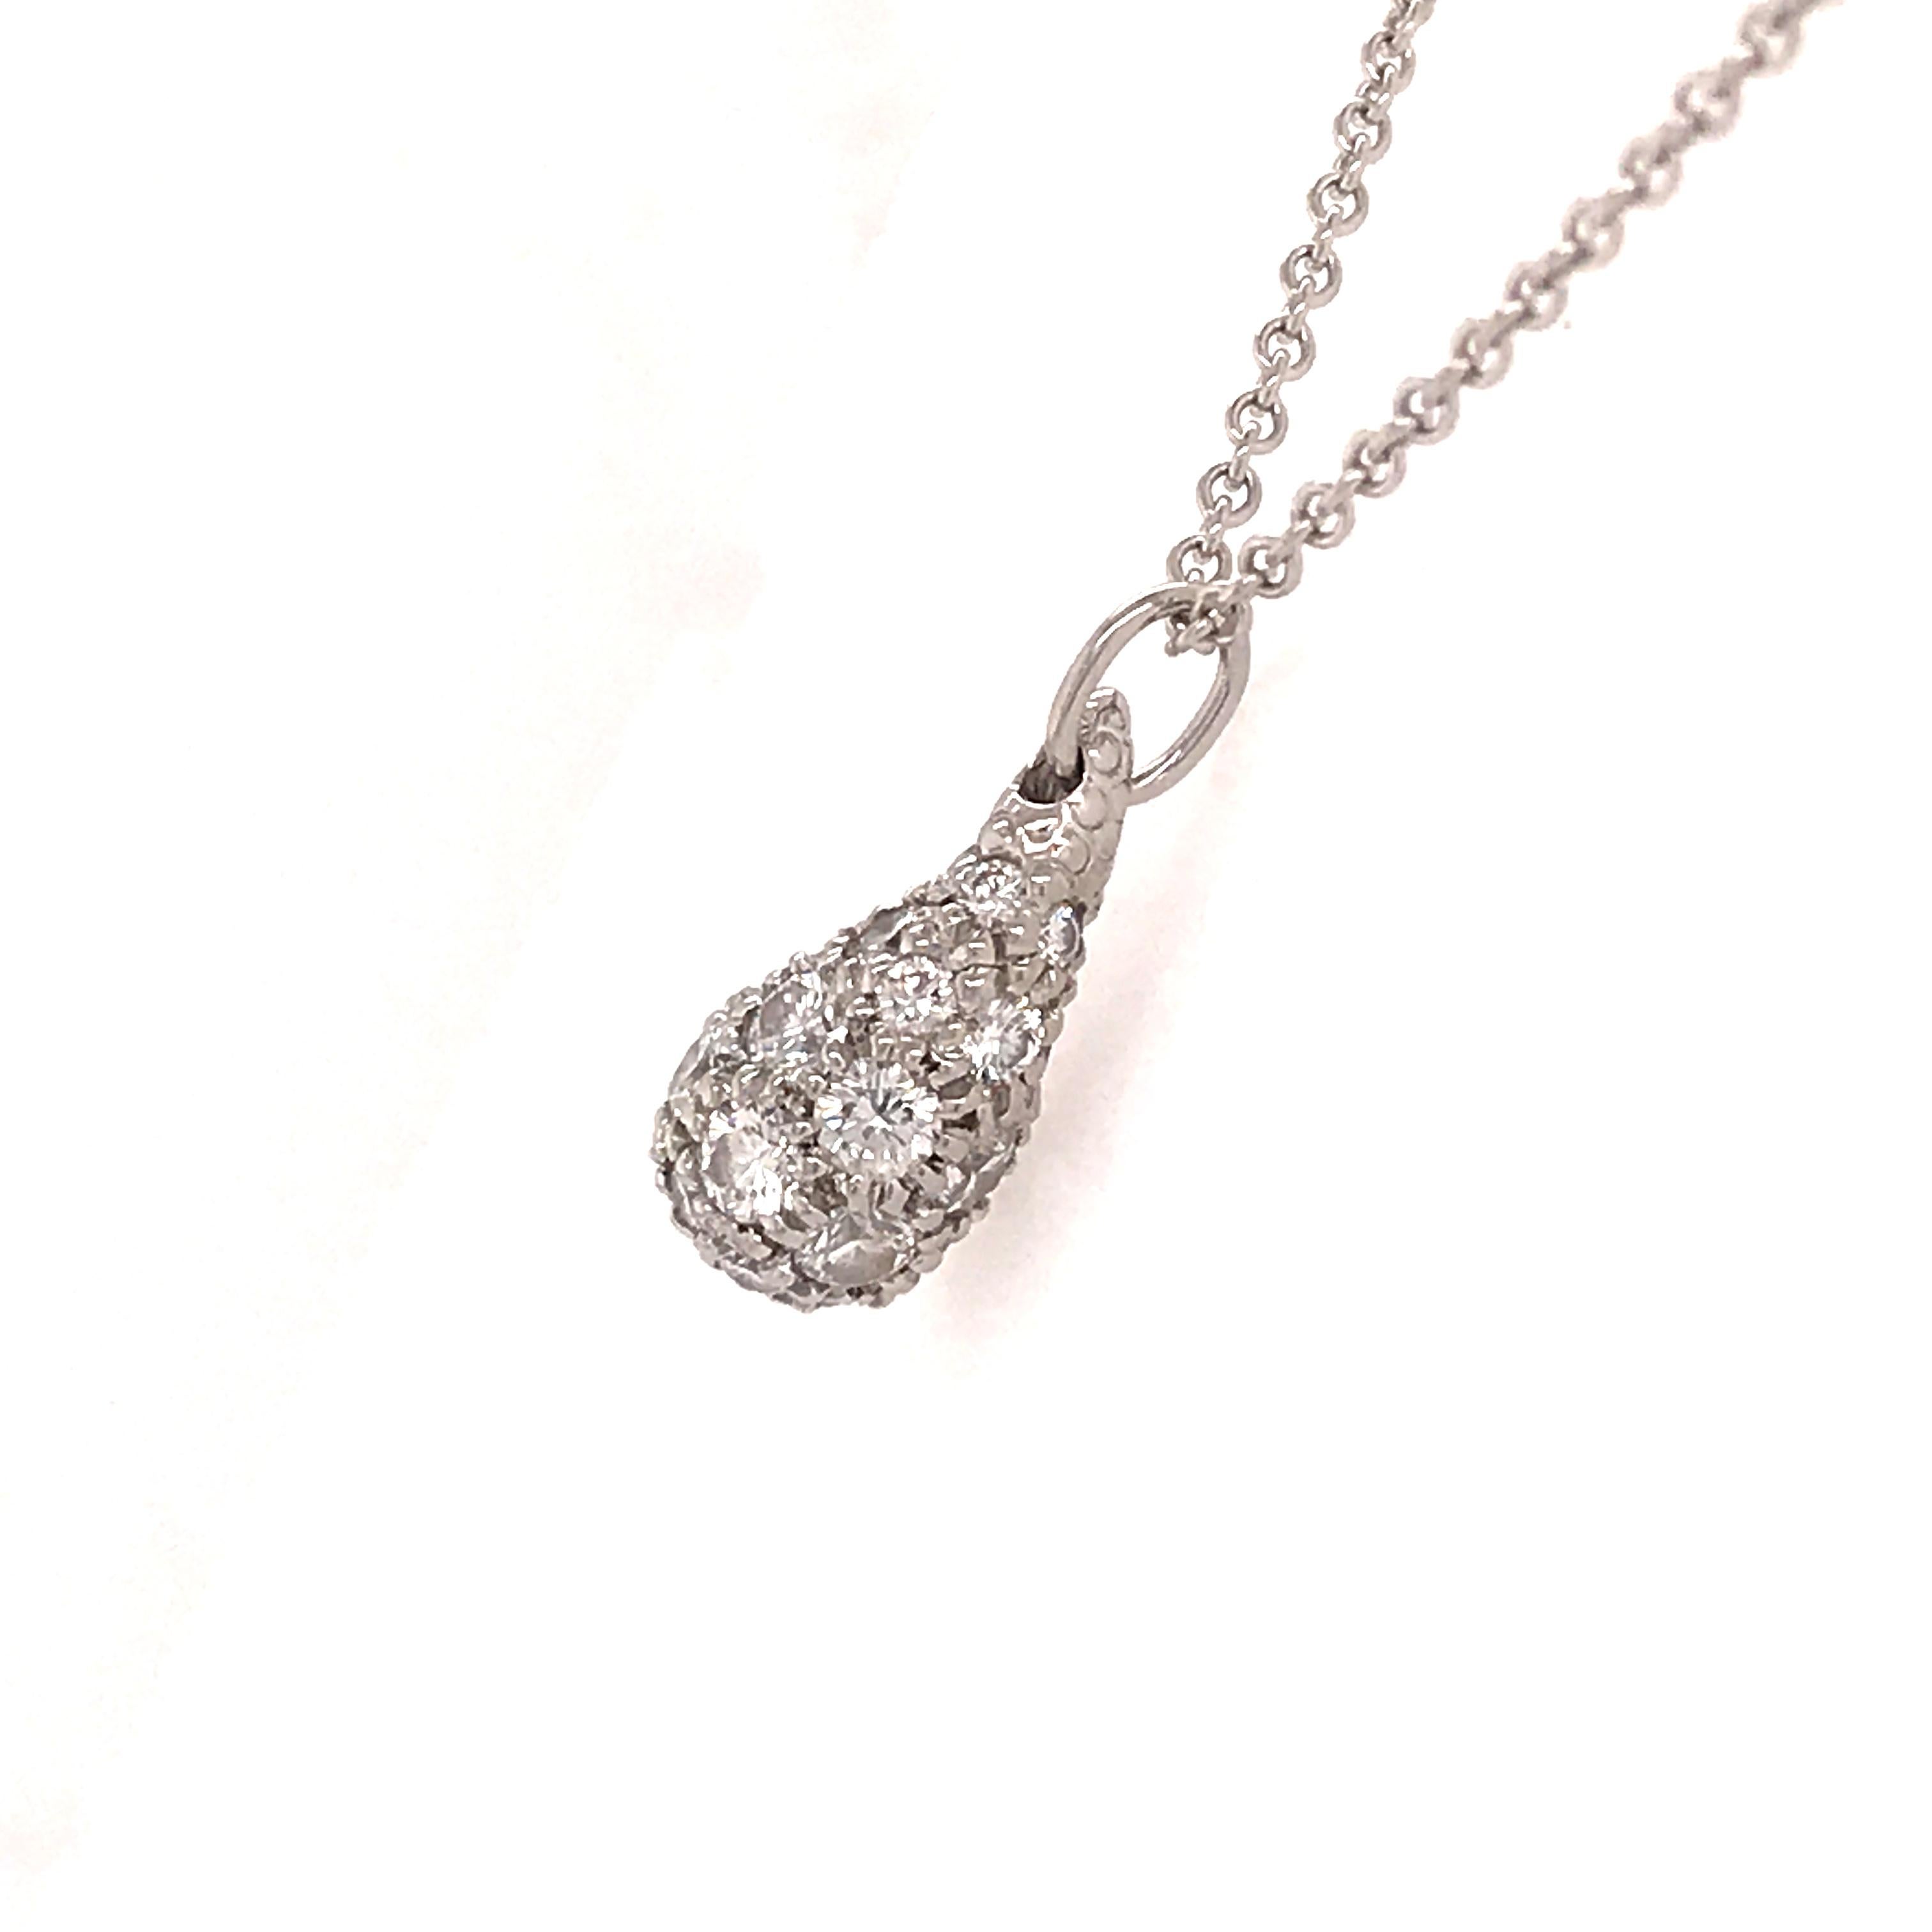 Tiffany & Co. Elsa Peretti Diamond Teardrop Necklace in Platinum. (30) Round Brilliant Cut Diamonds weighing 1.02 carat total weight, F-G in color and VS in clarity are expertly set. The Teardrop Pendant measures 1/2 inch in length, 1/4 inch in